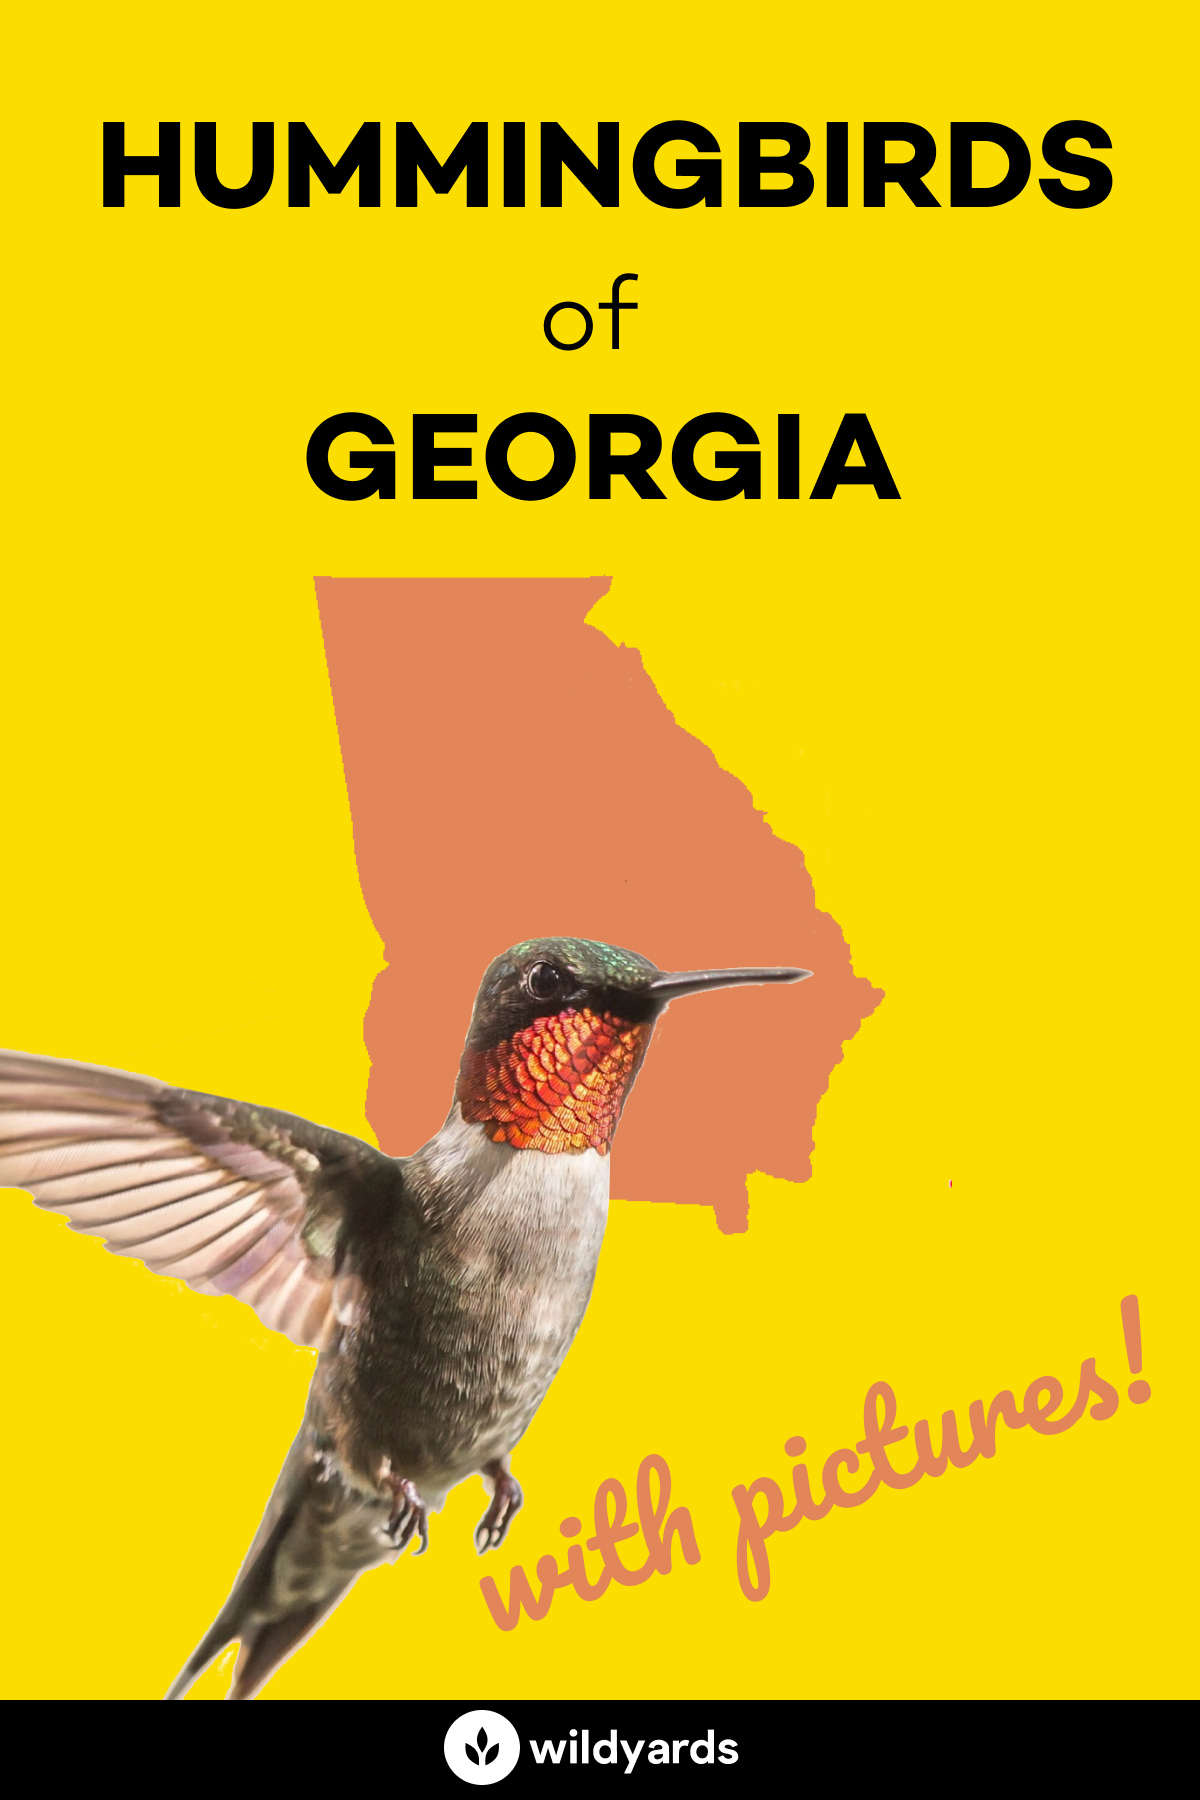 All 9 Hummingbirds in [With Pictures & Maps]